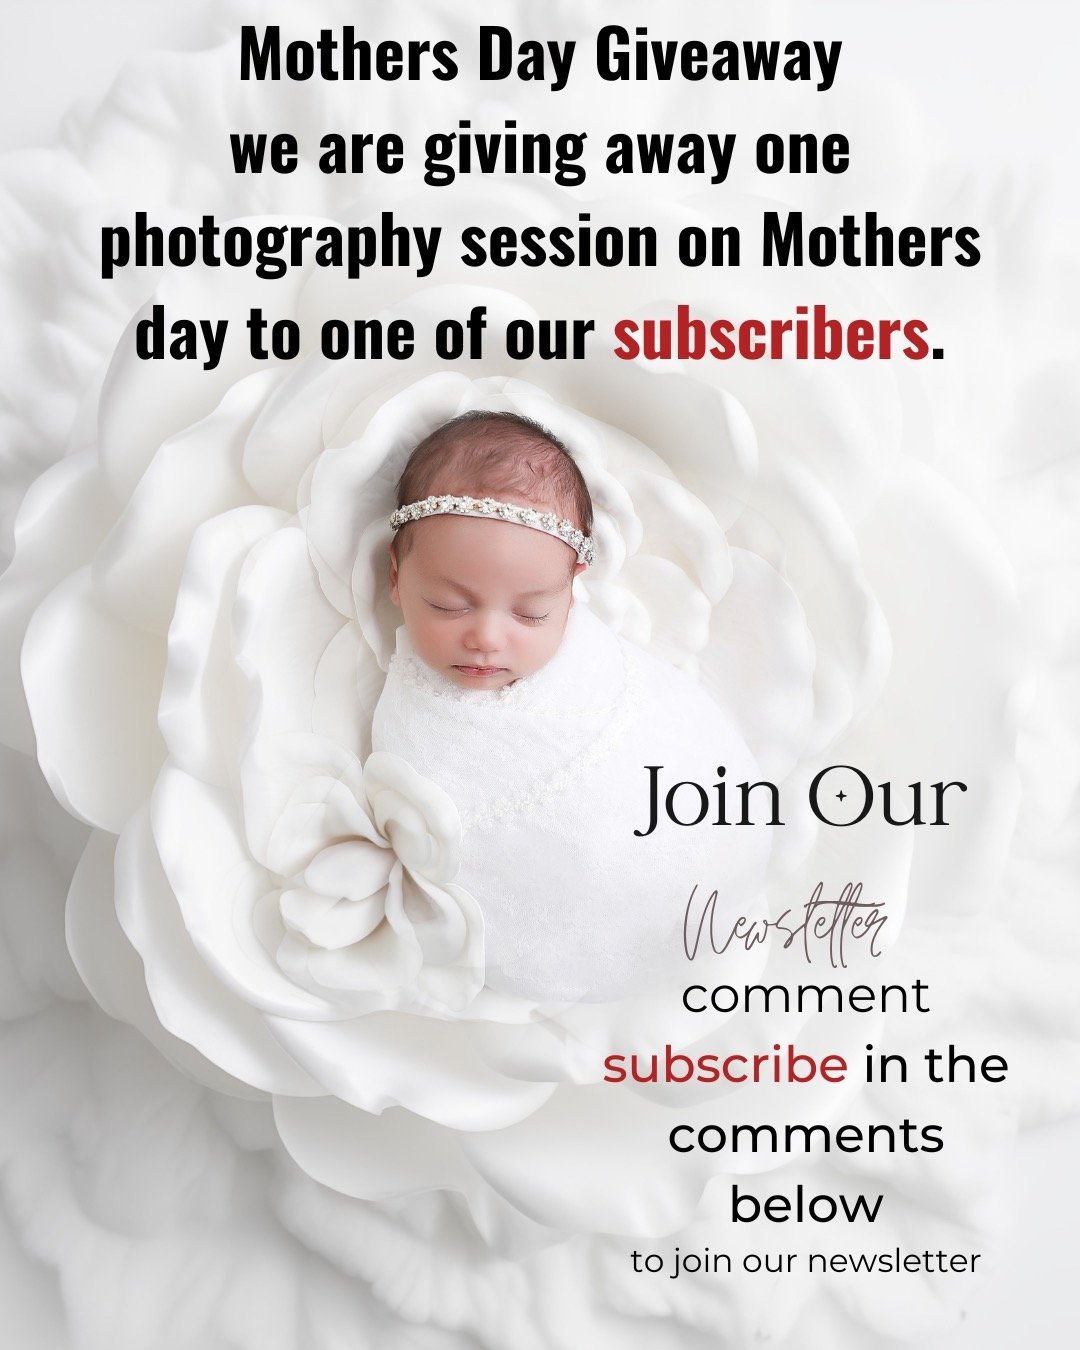 Are you a photography newsletter subscriber? I am picking a winner Sunday from my list to win a photography session at my studio! Comment subscribe below and then check your DM for a link to my newsletter. You need to be in it to win it! (winner of p